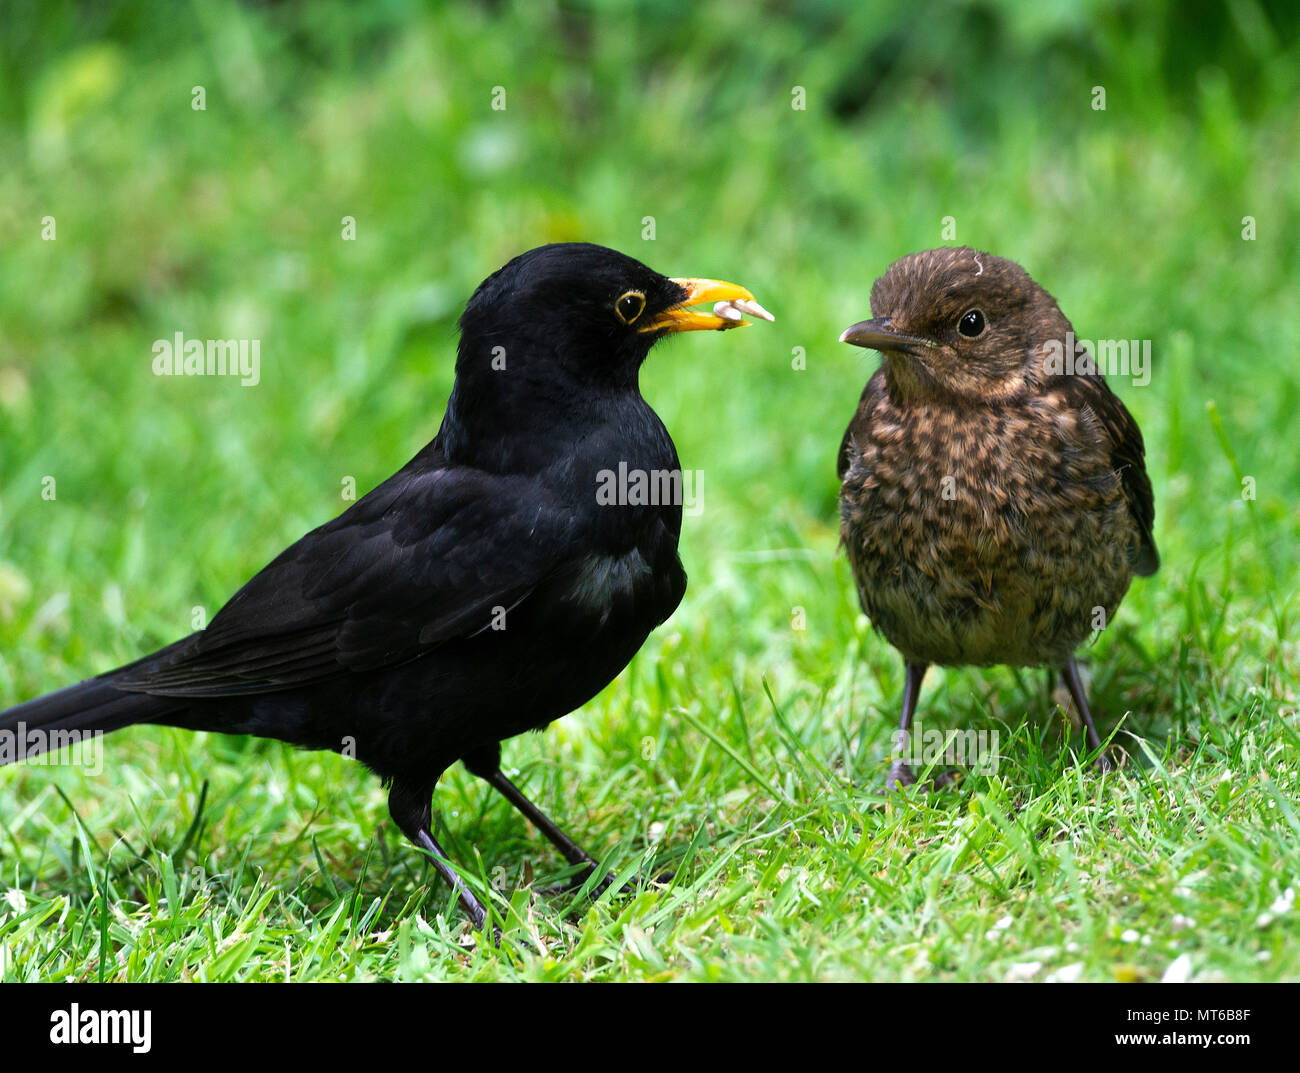 Adult Male Blackbird Feeding a Juvenile with Sunflower Heart Seeds on a Lawn in a Garden in Alsager Cheshire England United Kingdom UK Stock Photo